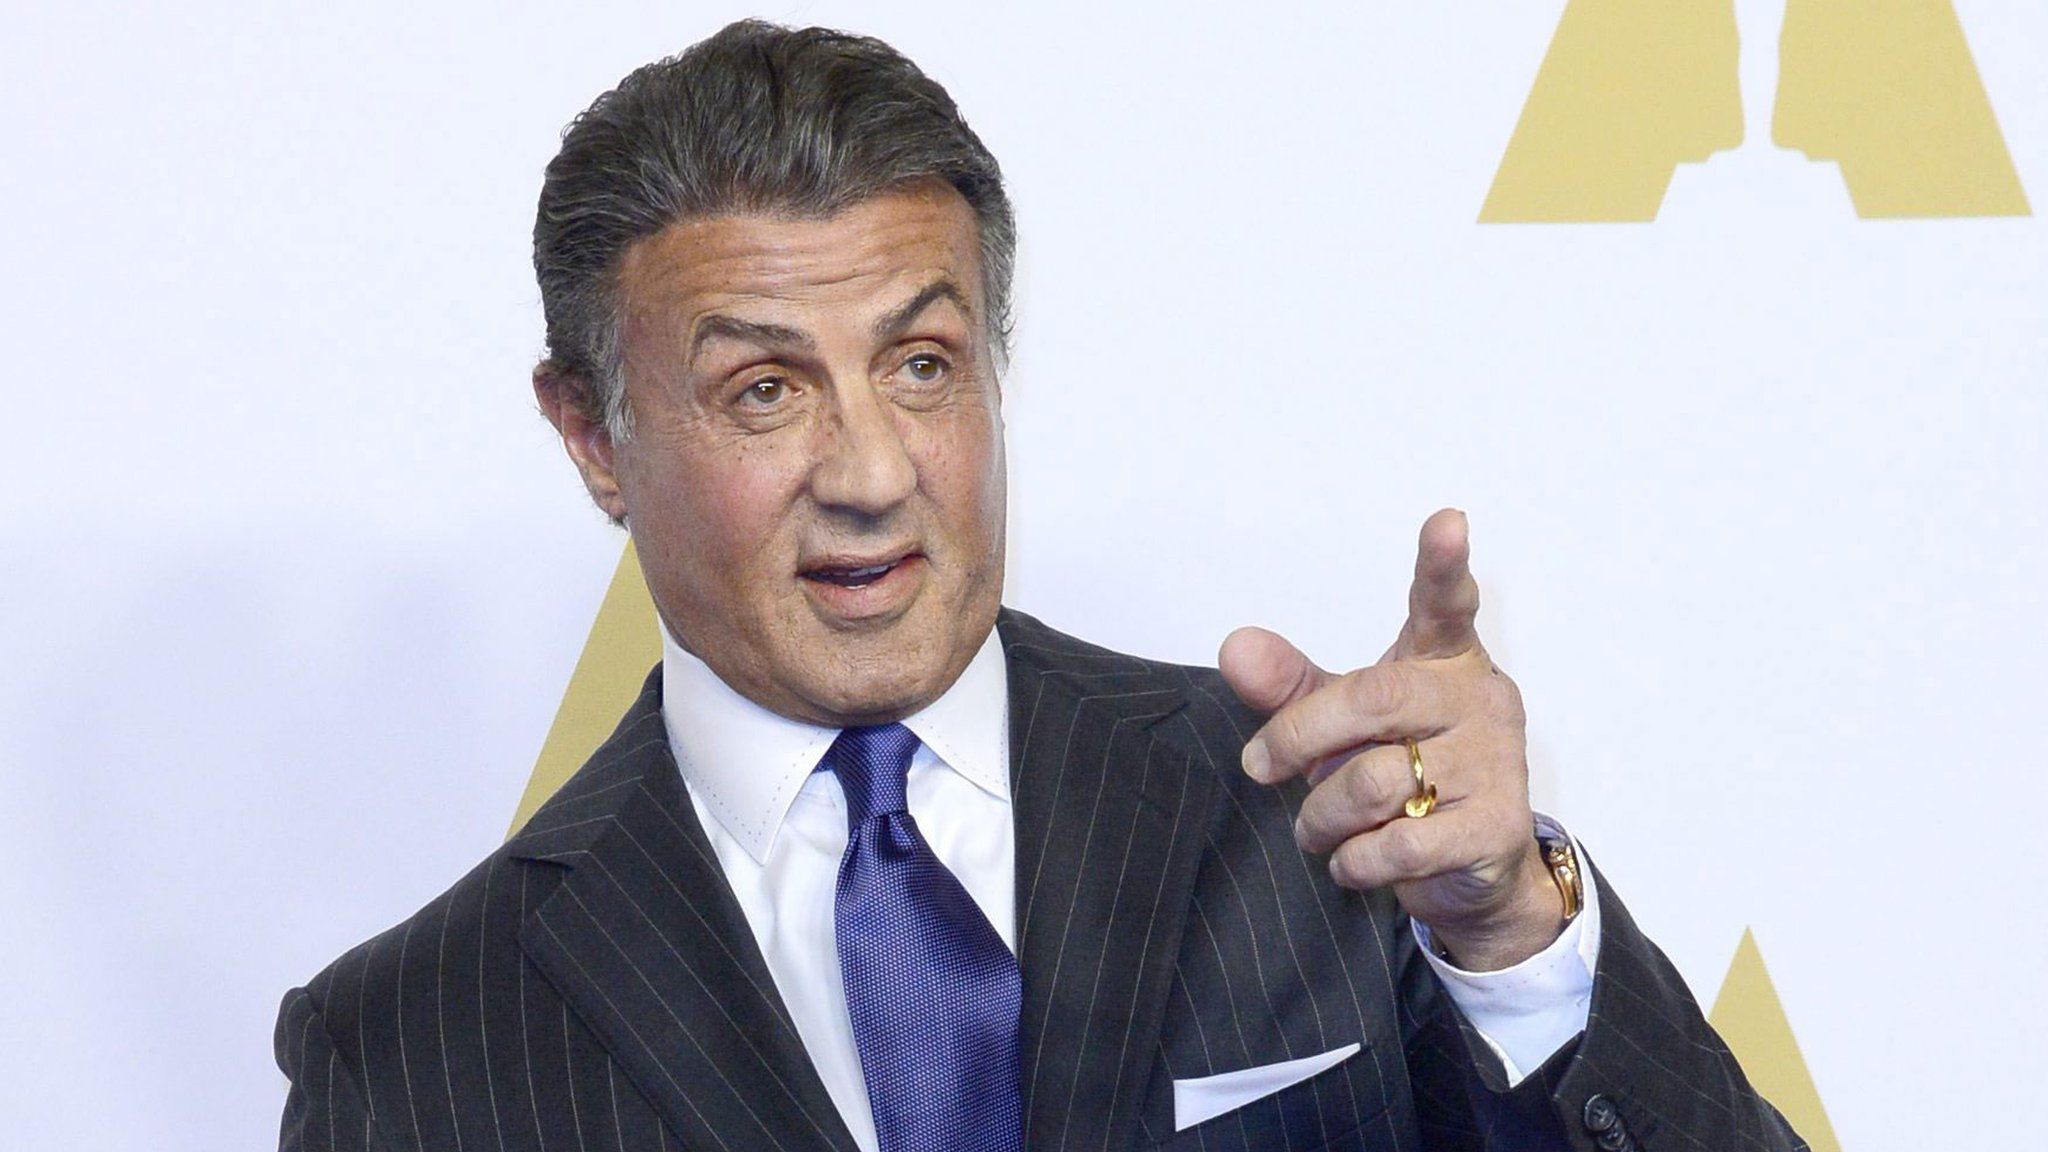 Sylvester Stallone at the Oscars luncheon